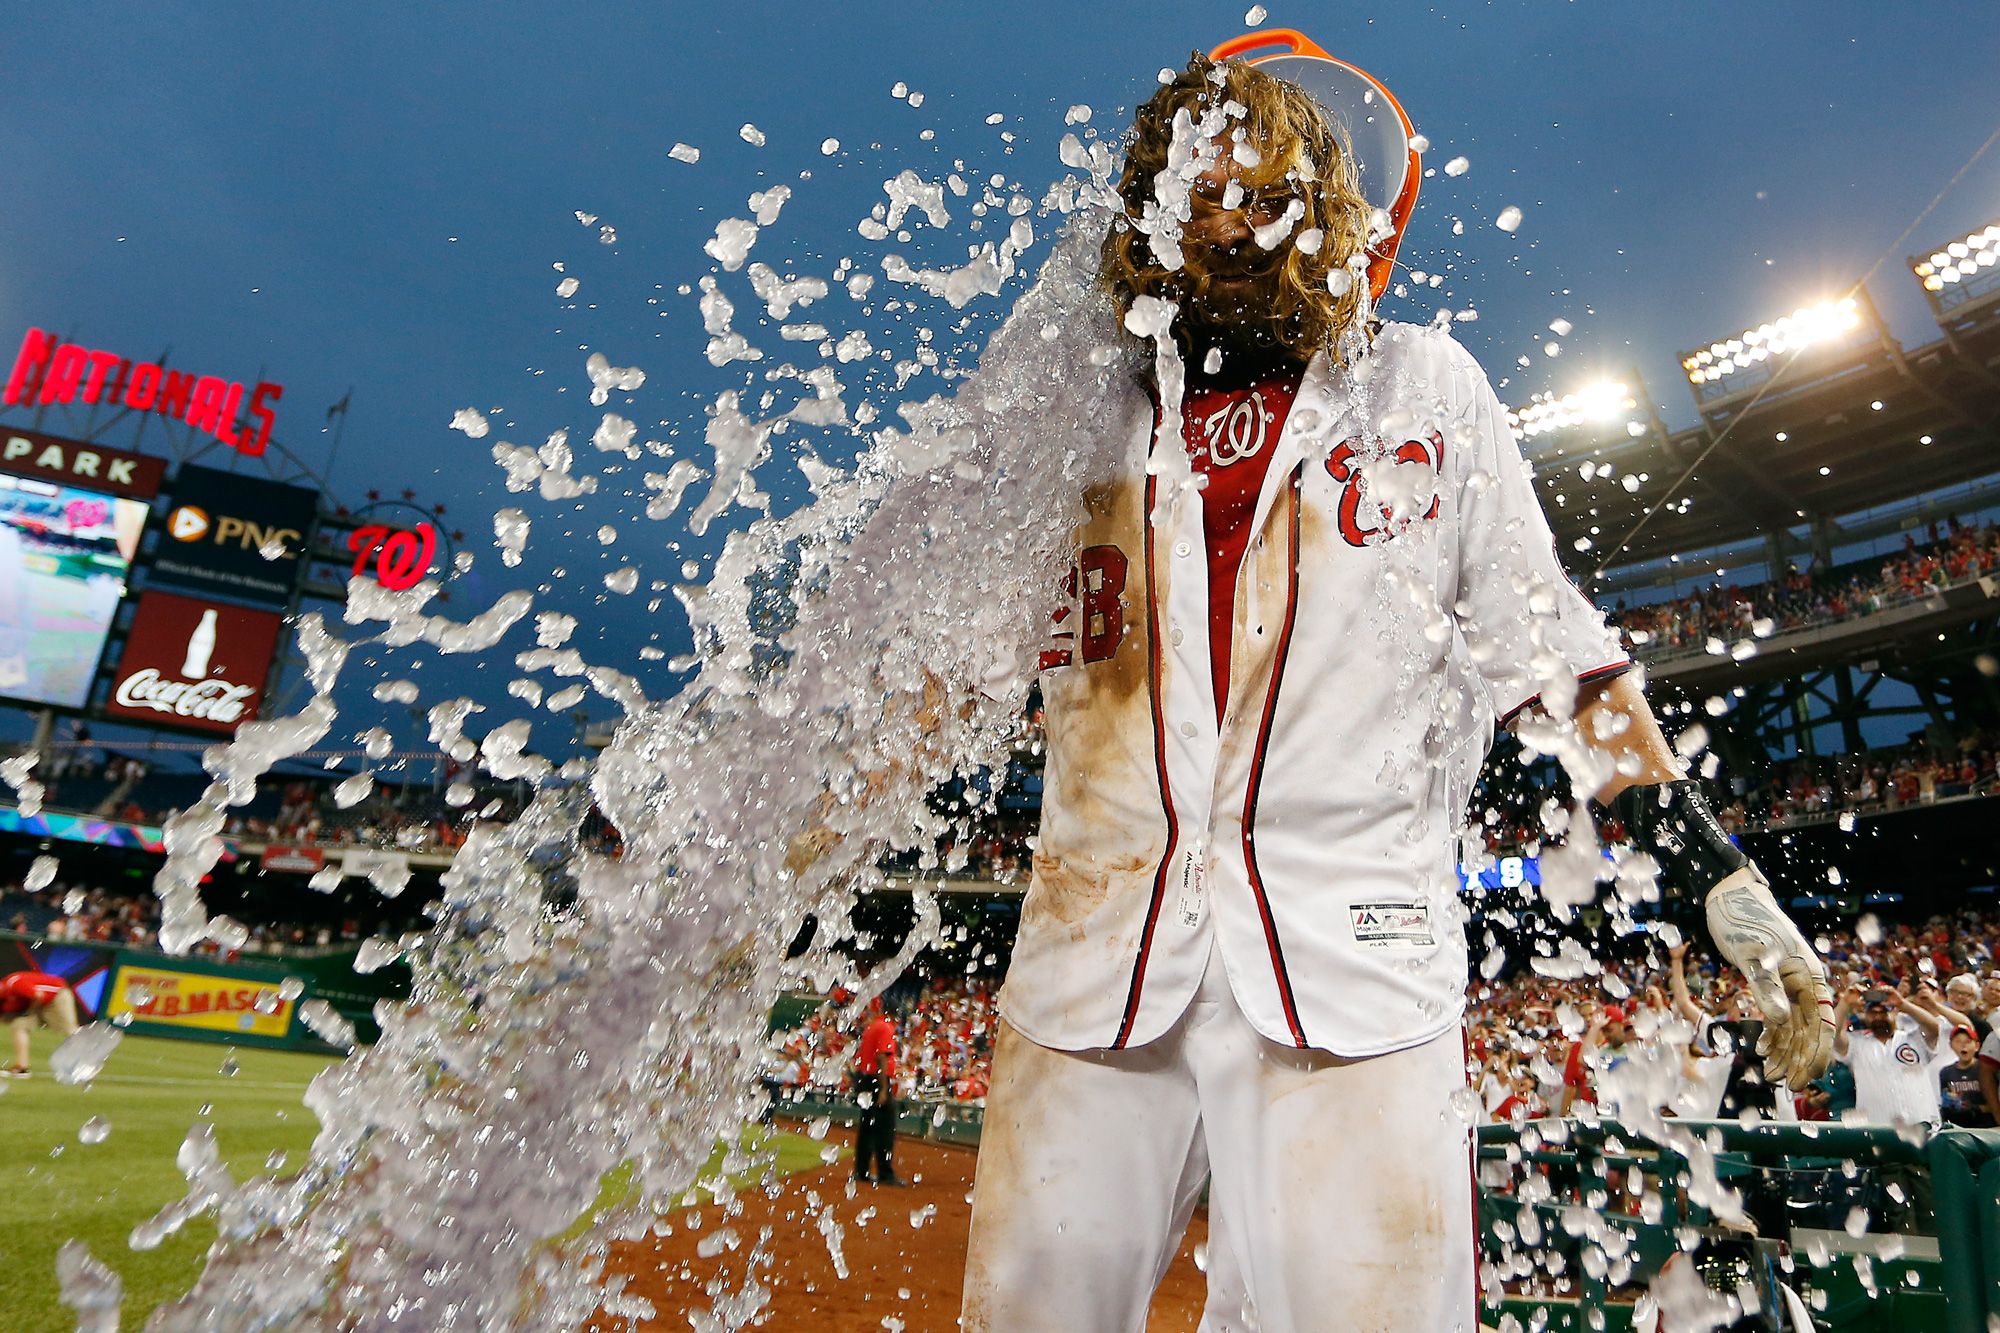  Jayson Werth #28 of the Washington Nationals is doused with a bucket of Gatorade by teammate Wilson Ramos #40 after hitting a walk-off single RBI in the twelfth inning against the Chicago Cubs at Nationals Park on June 15, 2016 in Washington, DC. 